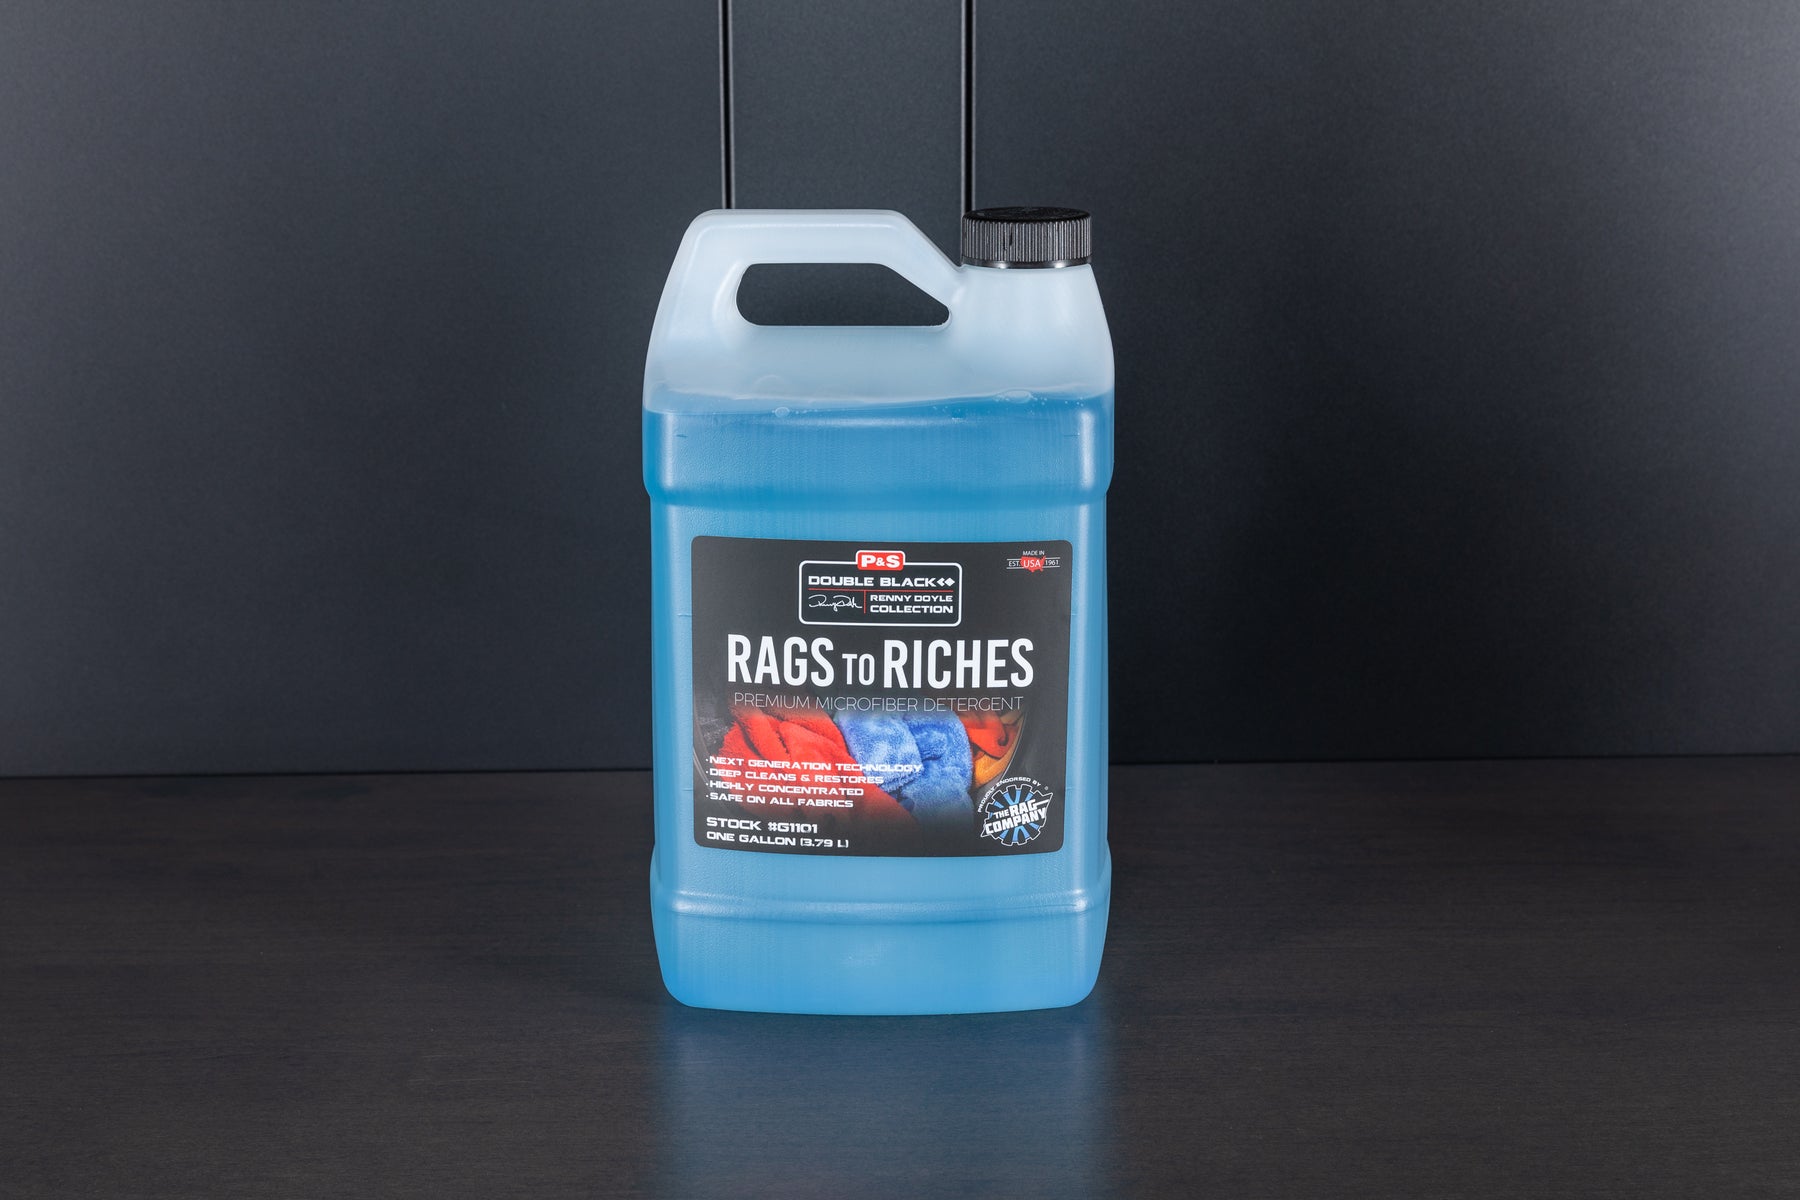 P&S Rags to Riches Microfiber Detergent – G Shift (Pty) Ltd